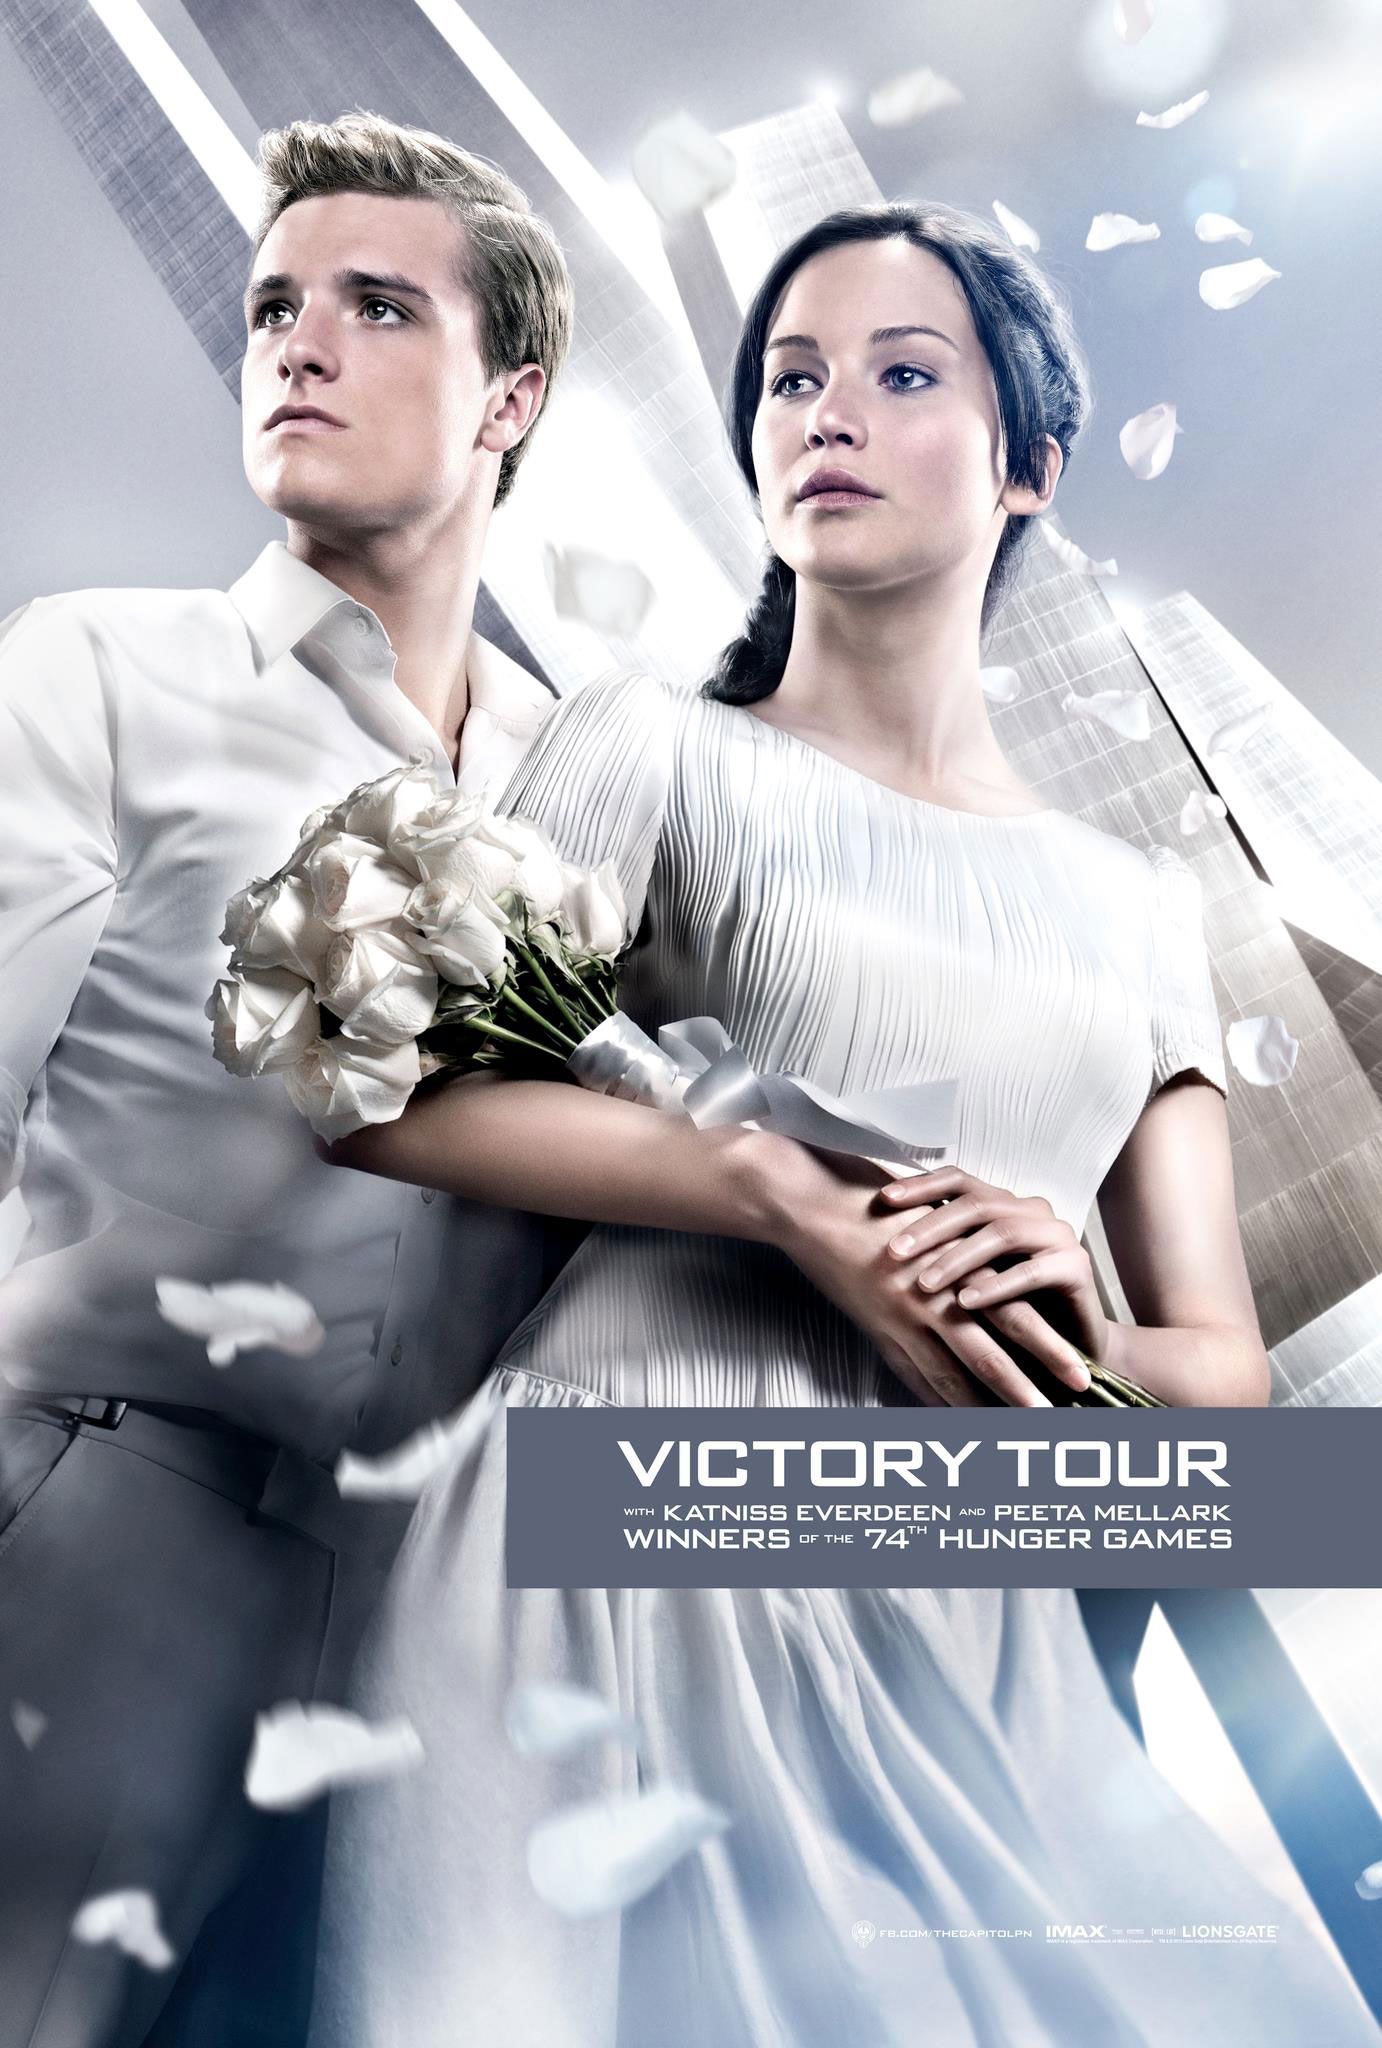 catching fire posters